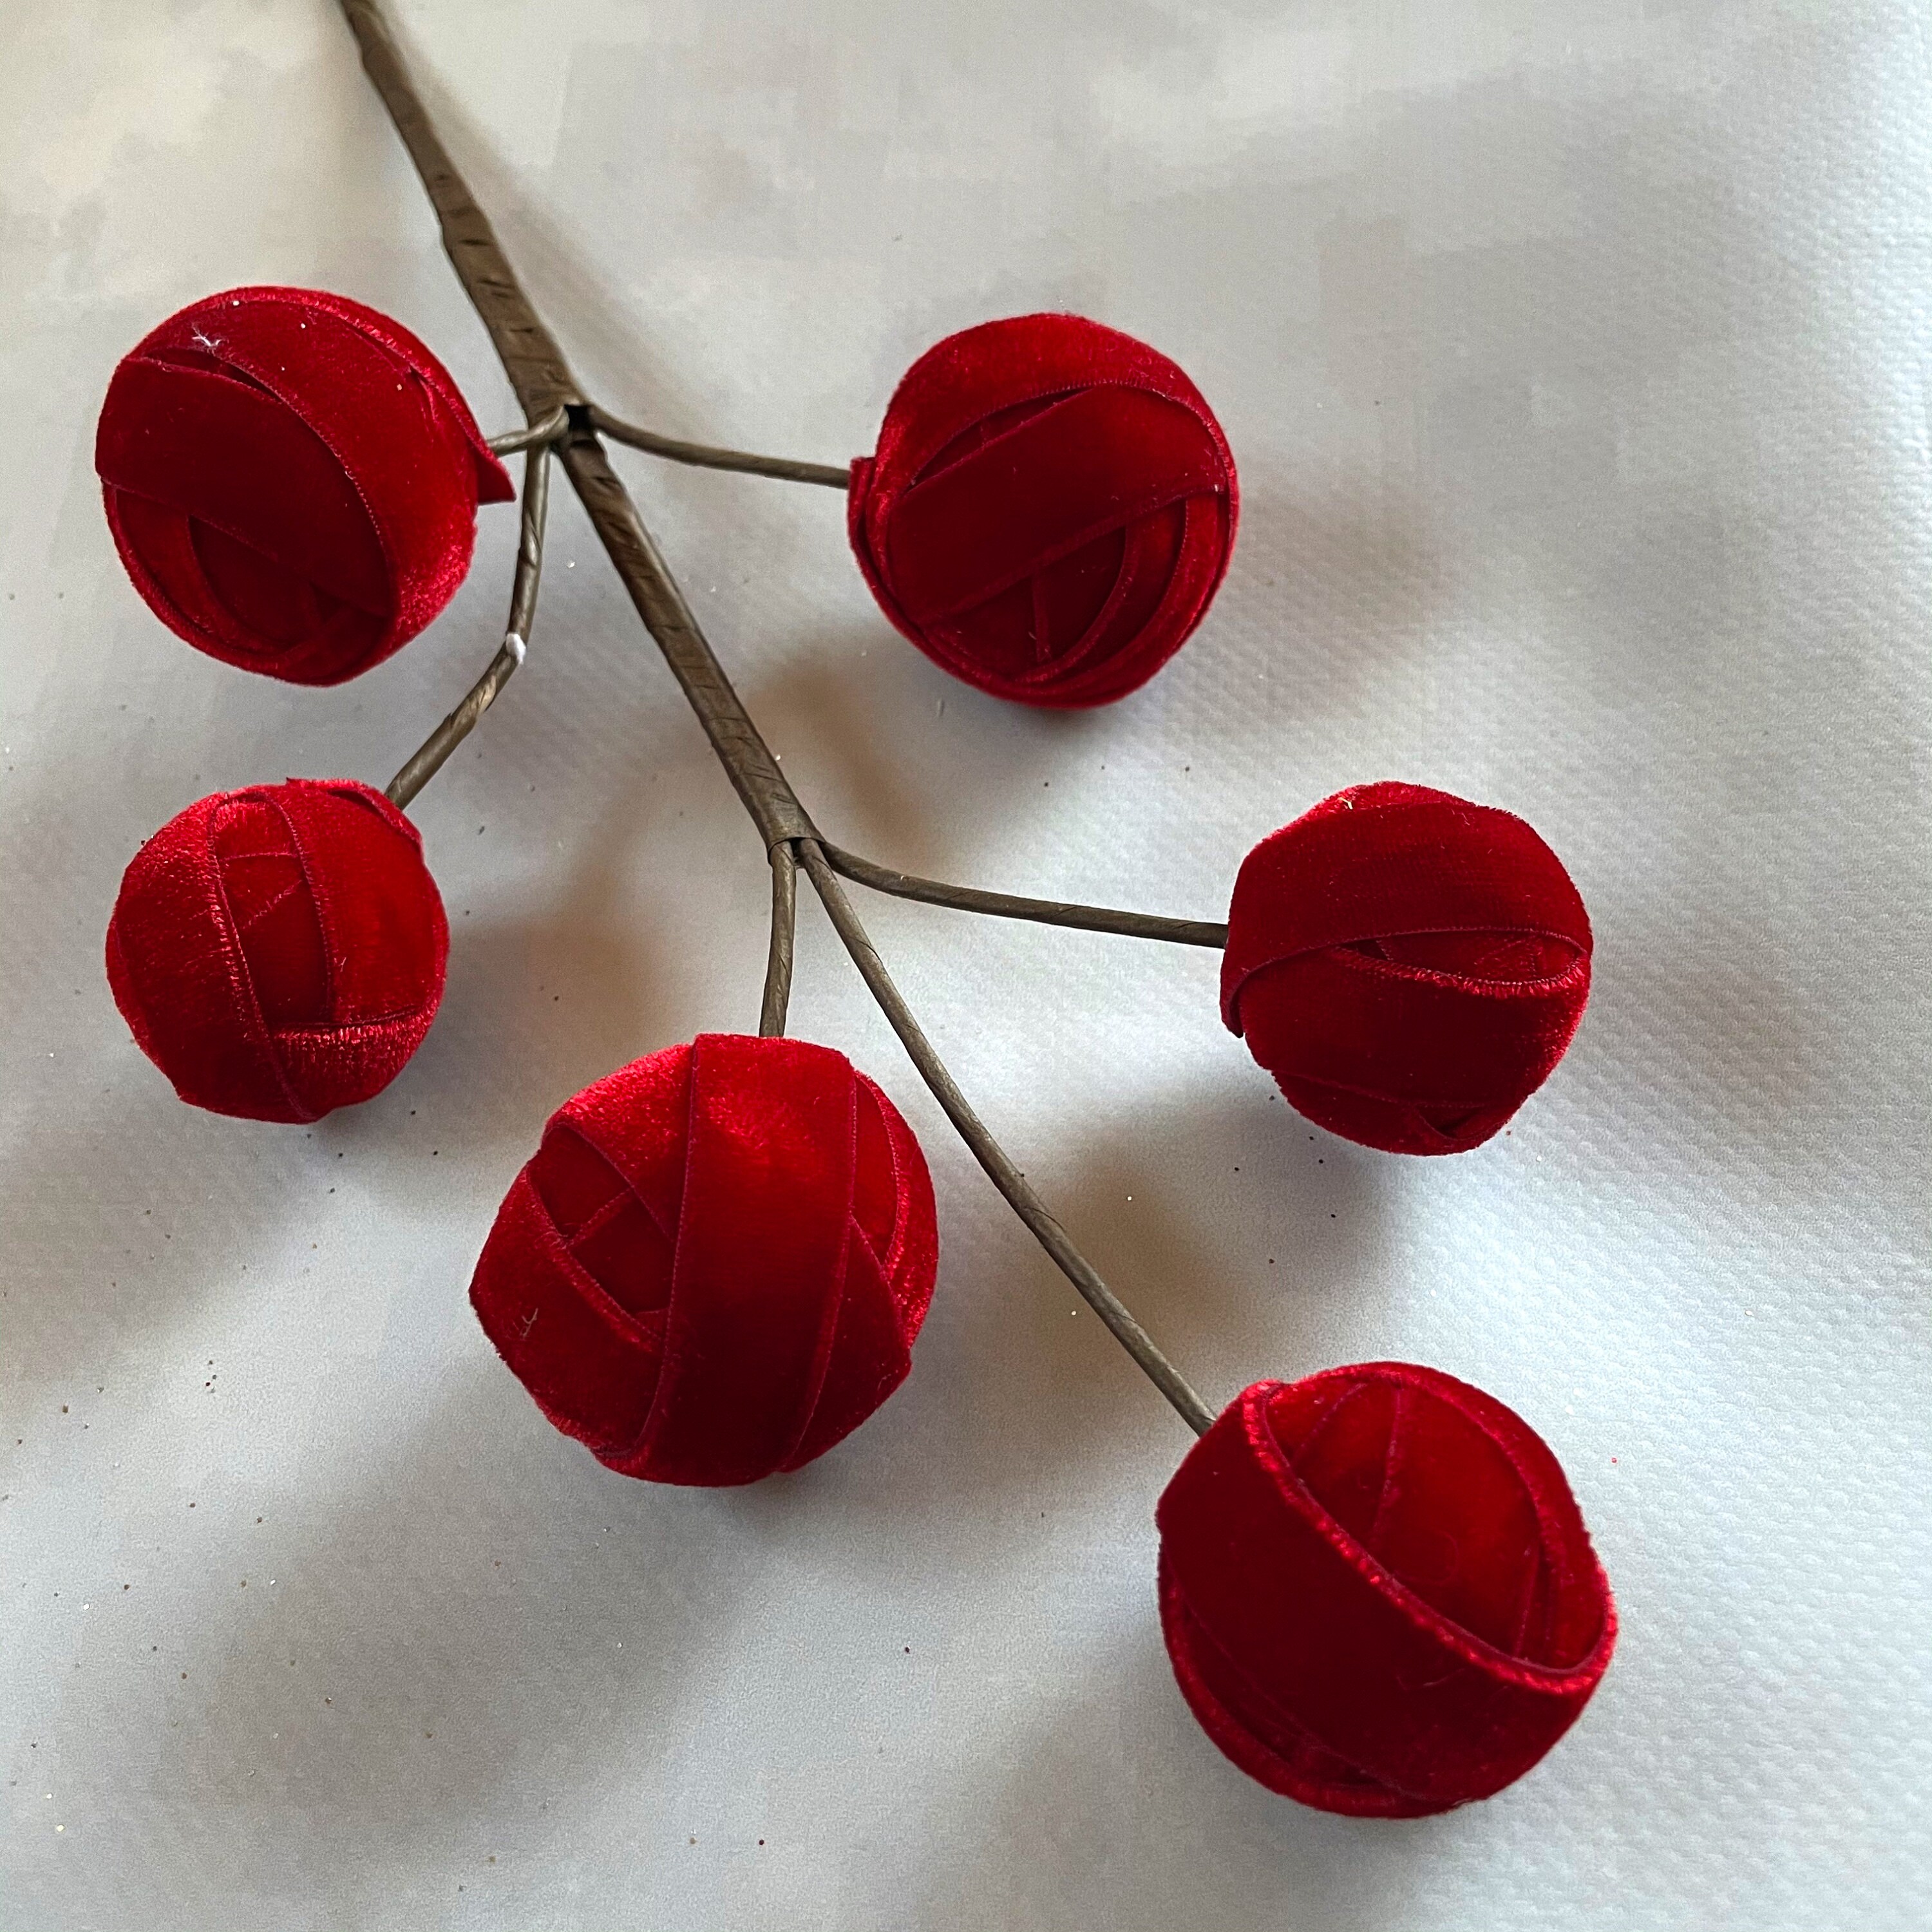 50 Thorn Branches, Dried Rose Stems for Vases and Home Decor